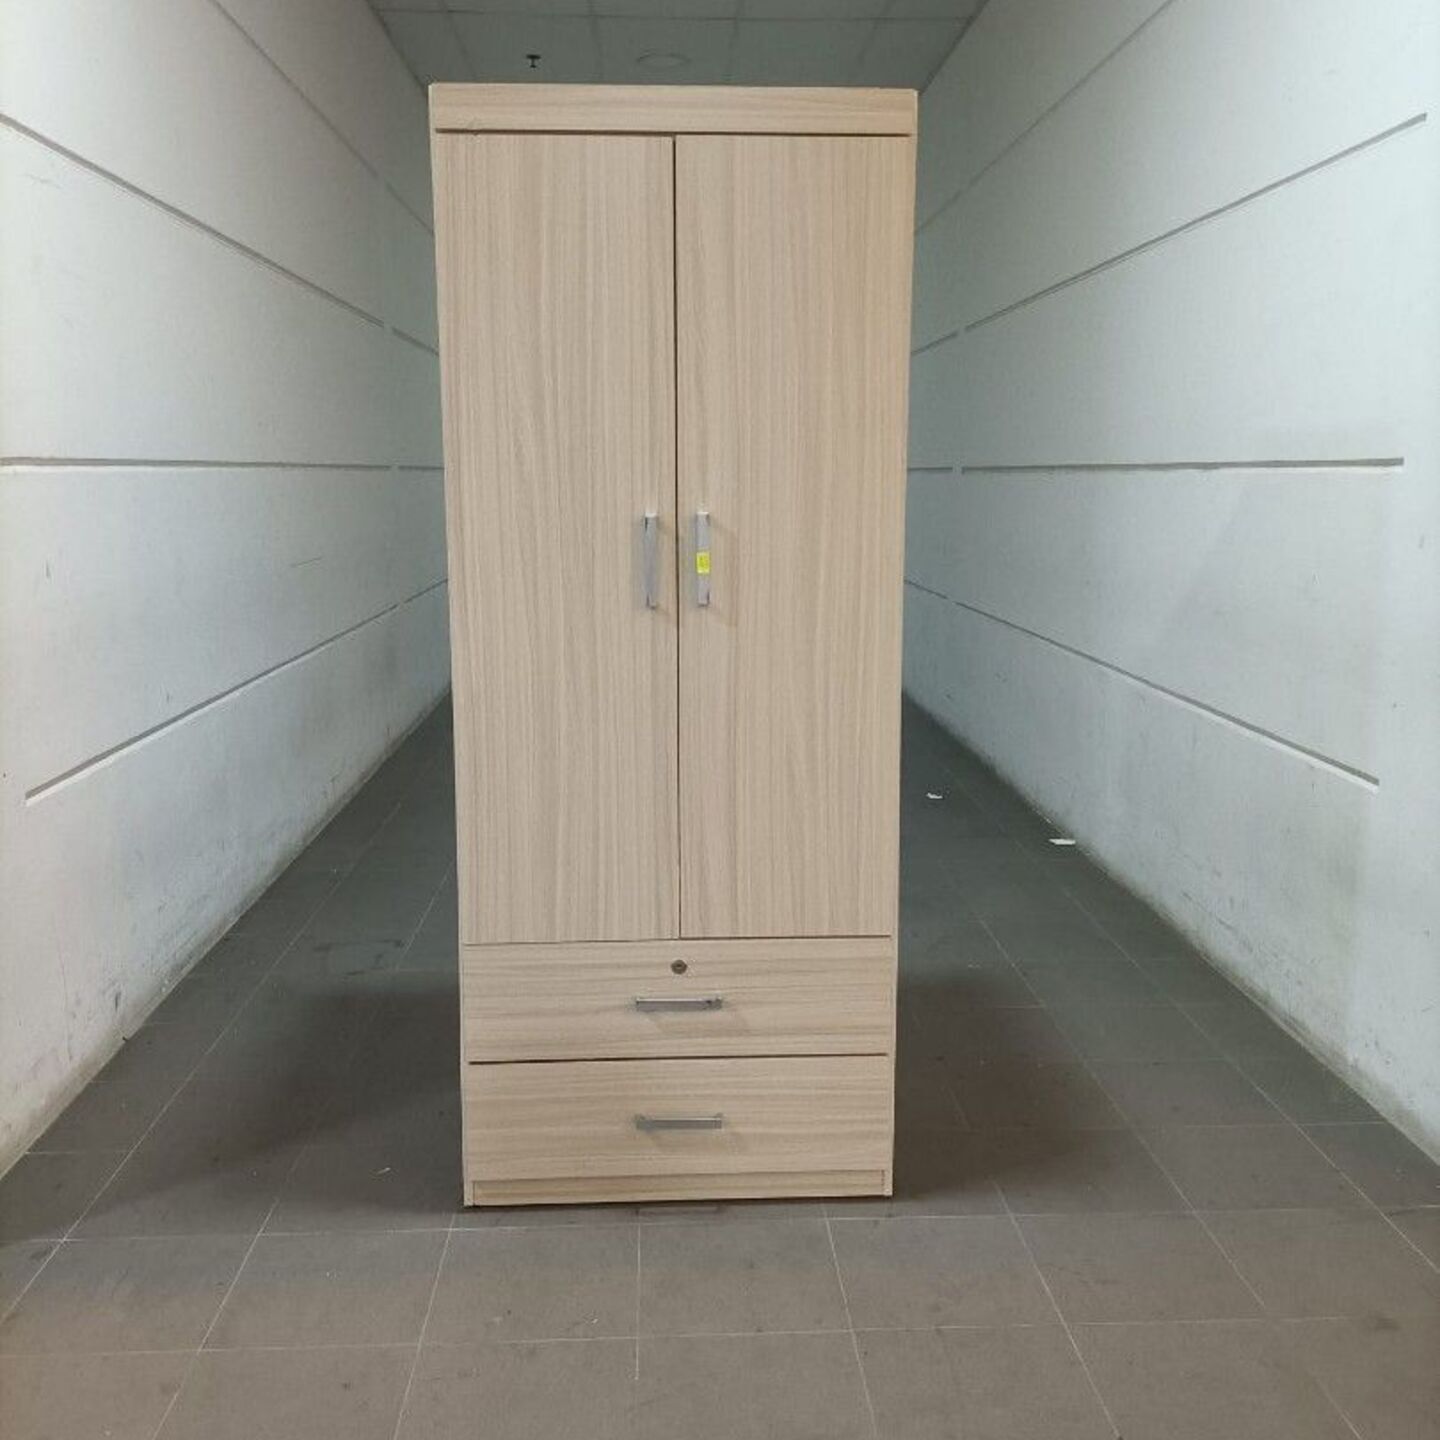 LEFAL II 2 Door Wardrobe in WHITE WASH with Drawers